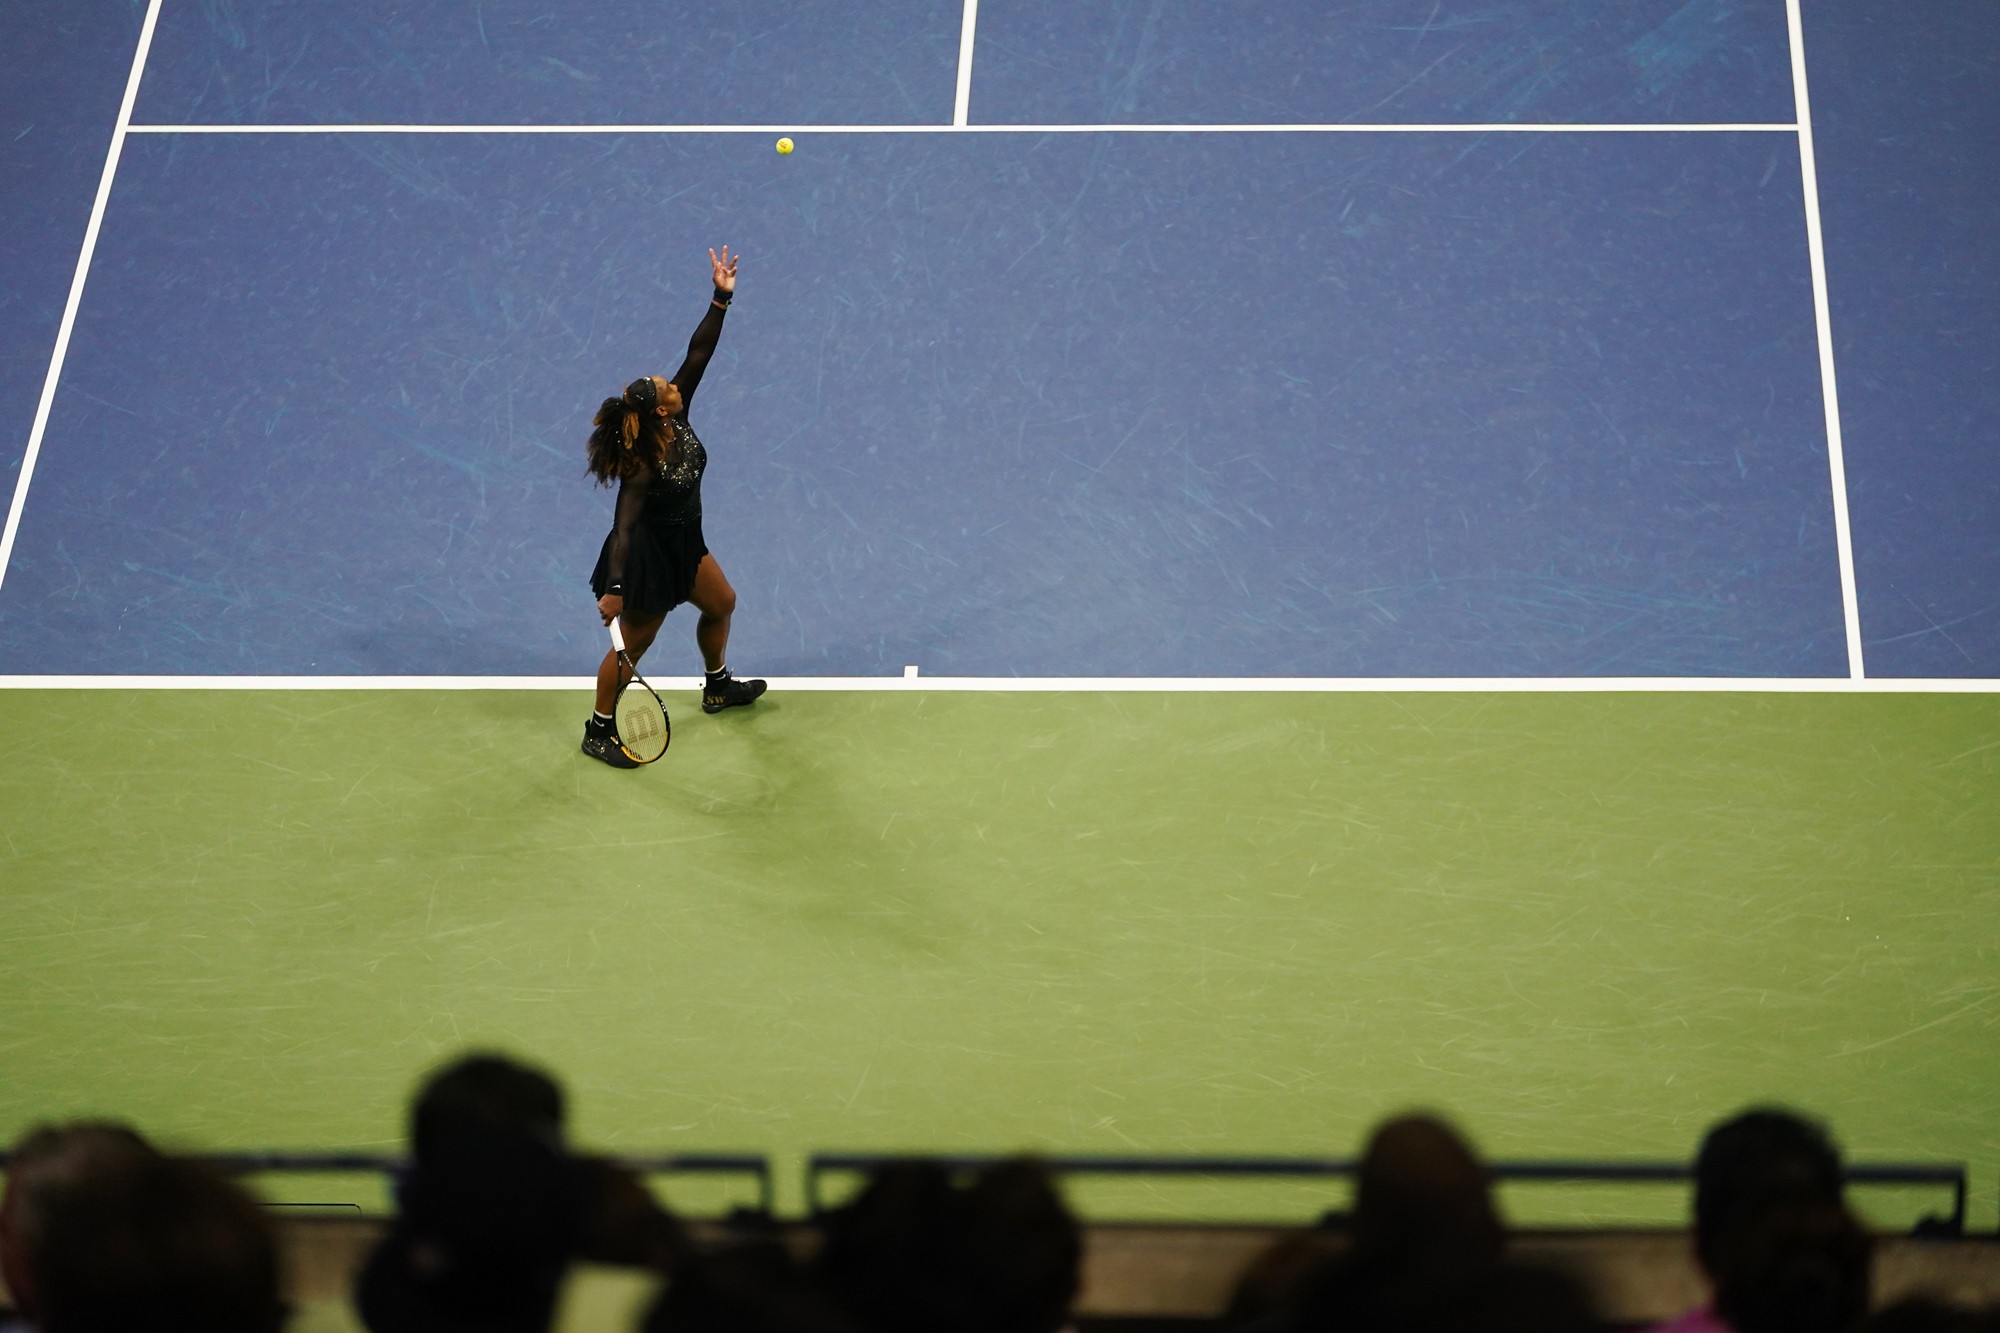 A woman in all black serves a tennis ball at the US Open.